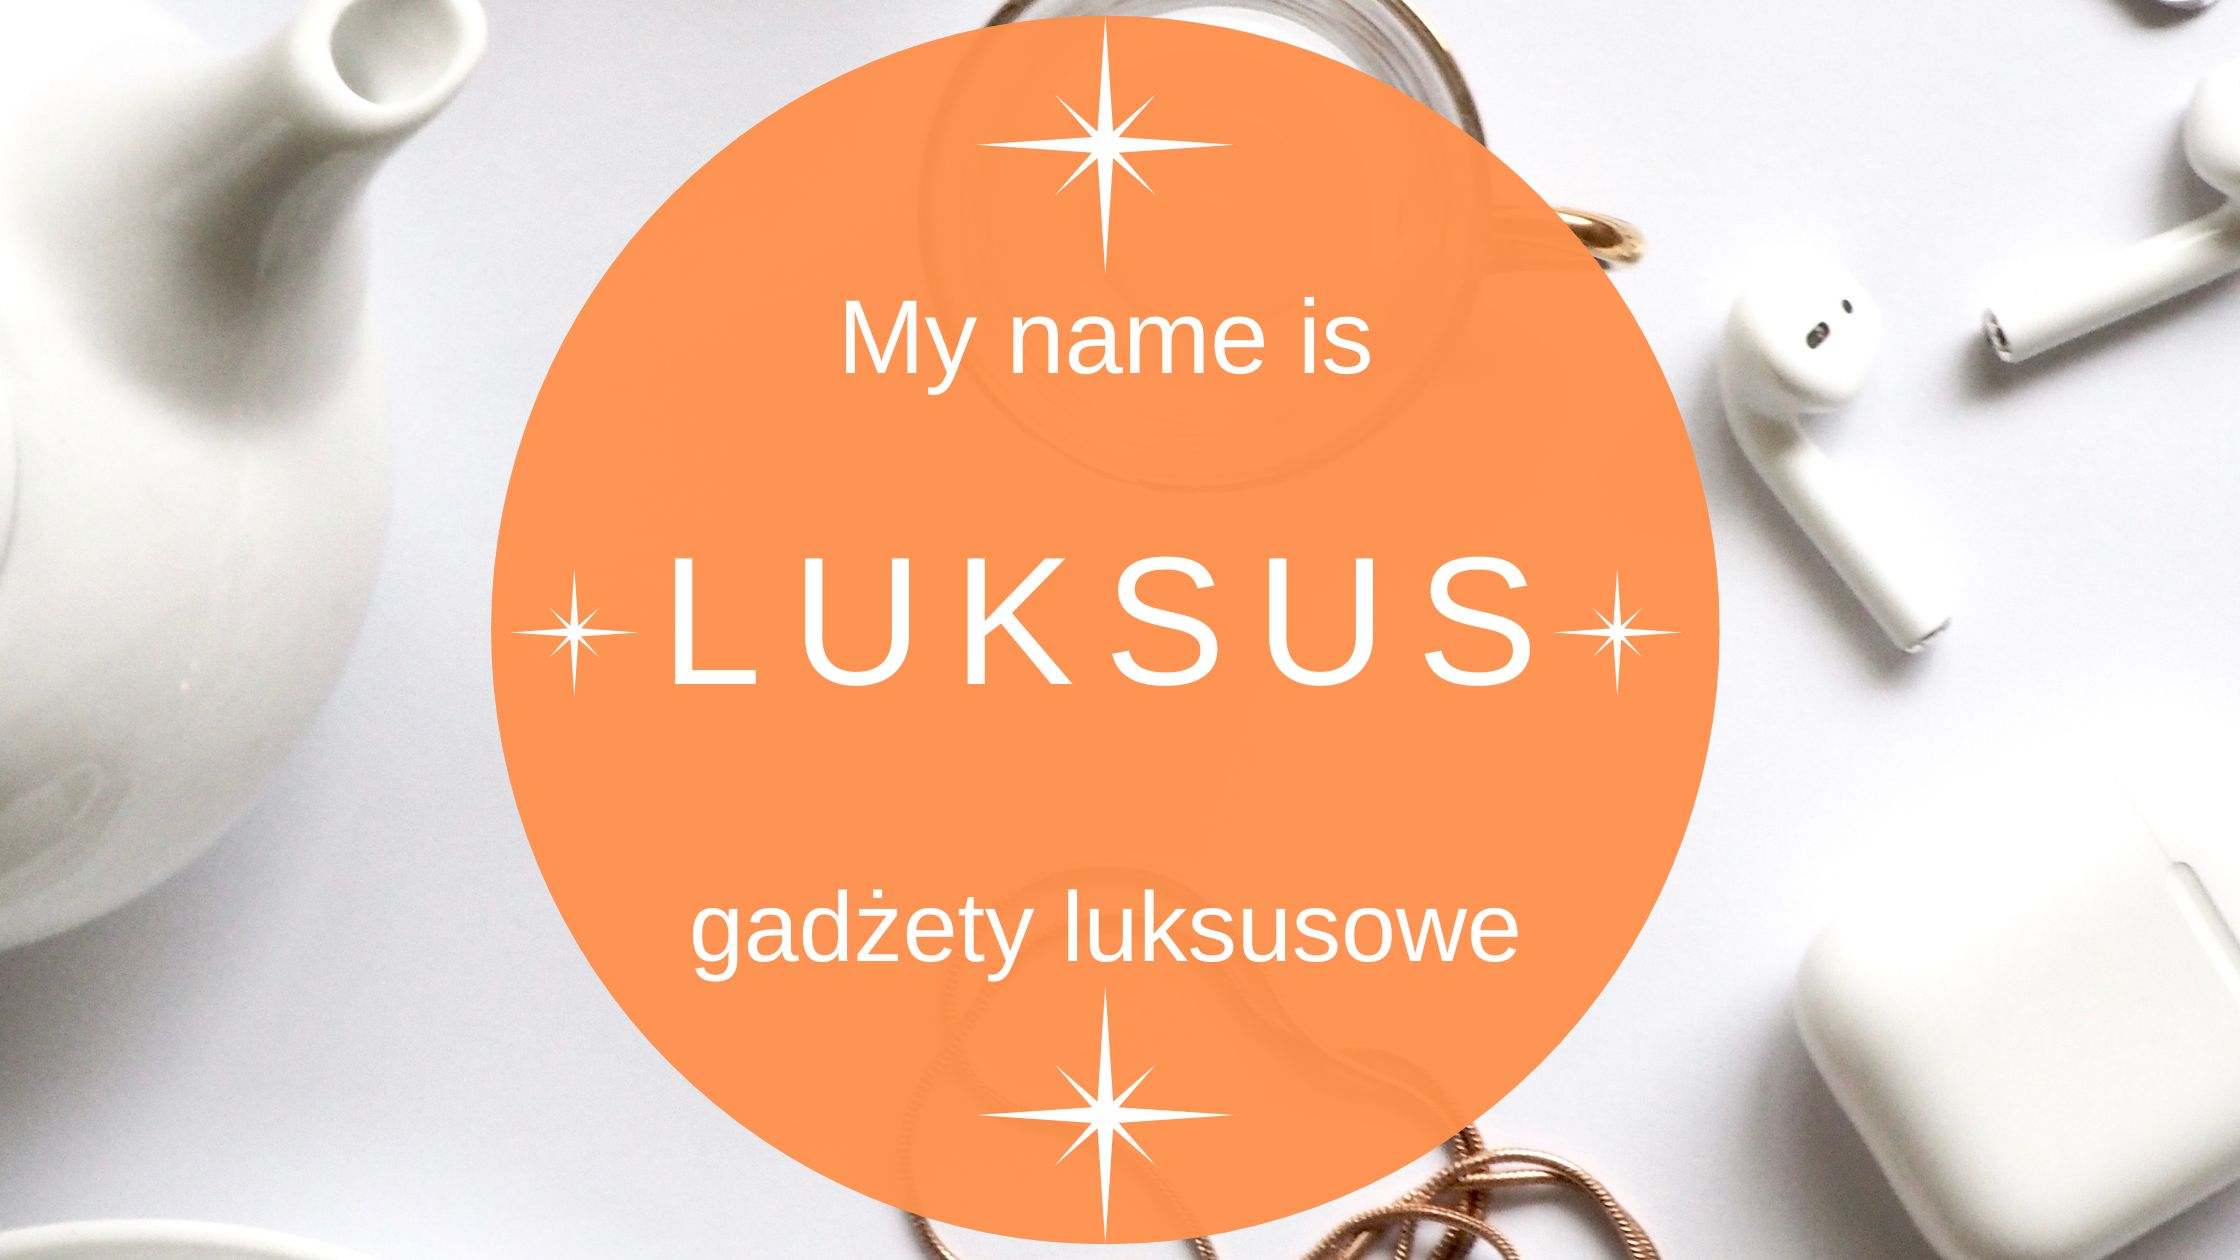 My name is luksus